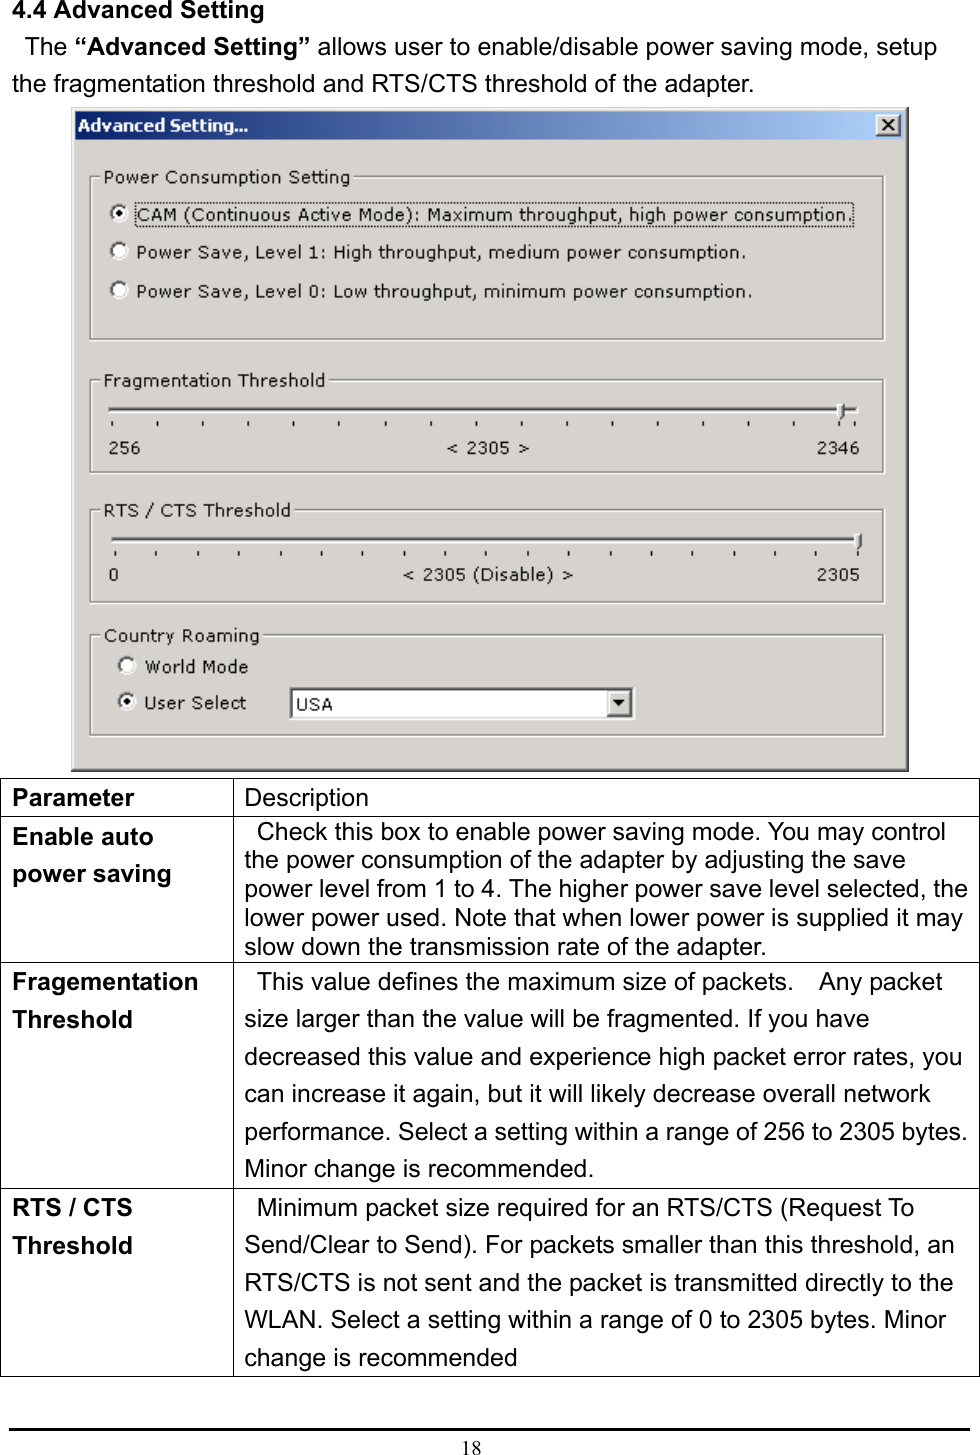  18  4.4 Advanced Setting    The “Advanced Setting” allows user to enable/disable power saving mode, setup the fragmentation threshold and RTS/CTS threshold of the adapter.    Parameter   Description  Enable auto power saving     Check this box to enable power saving mode. You may control the power consumption of the adapter by adjusting the save power level from 1 to 4. The higher power save level selected, the lower power used. Note that when lower power is supplied it may slow down the transmission rate of the adapter.   Fragementation Threshold    This value defines the maximum size of packets.    Any packet size larger than the value will be fragmented. If you have decreased this value and experience high packet error rates, you can increase it again, but it will likely decrease overall network performance. Select a setting within a range of 256 to 2305 bytes. Minor change is recommended.   RTS / CTS Threshold    Minimum packet size required for an RTS/CTS (Request To Send/Clear to Send). For packets smaller than this threshold, an RTS/CTS is not sent and the packet is transmitted directly to the WLAN. Select a setting within a range of 0 to 2305 bytes. Minor change is recommended    